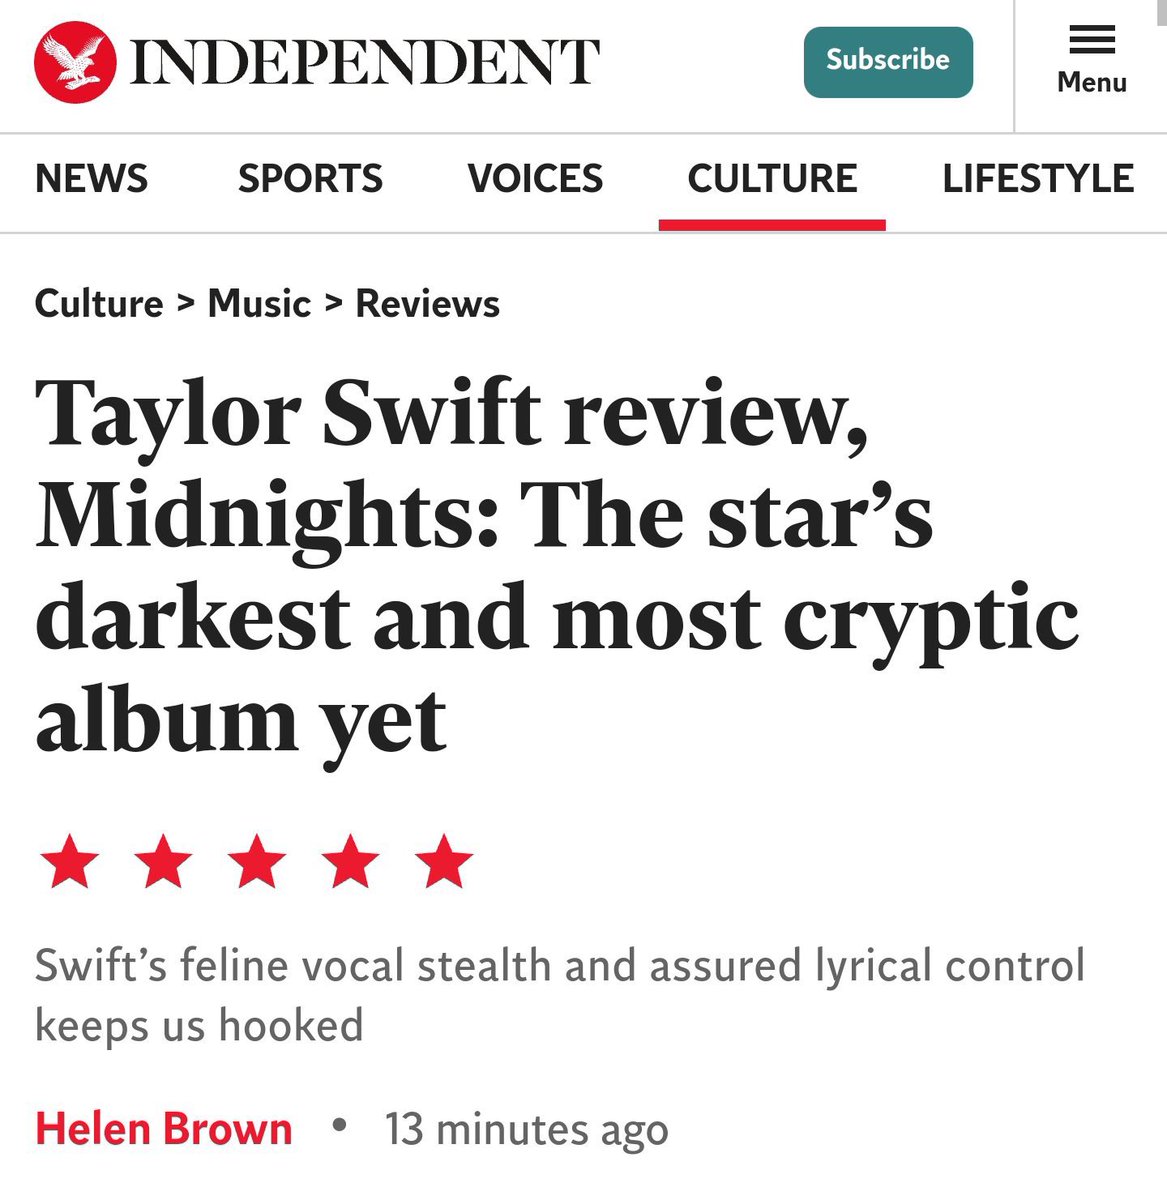 THE INDEPENDENT ONLY GAVE FOLKLORE FOUR STARS BUT THEY GAVE MIDNIGHTS FIVE STARS. WE ARE NOT READY